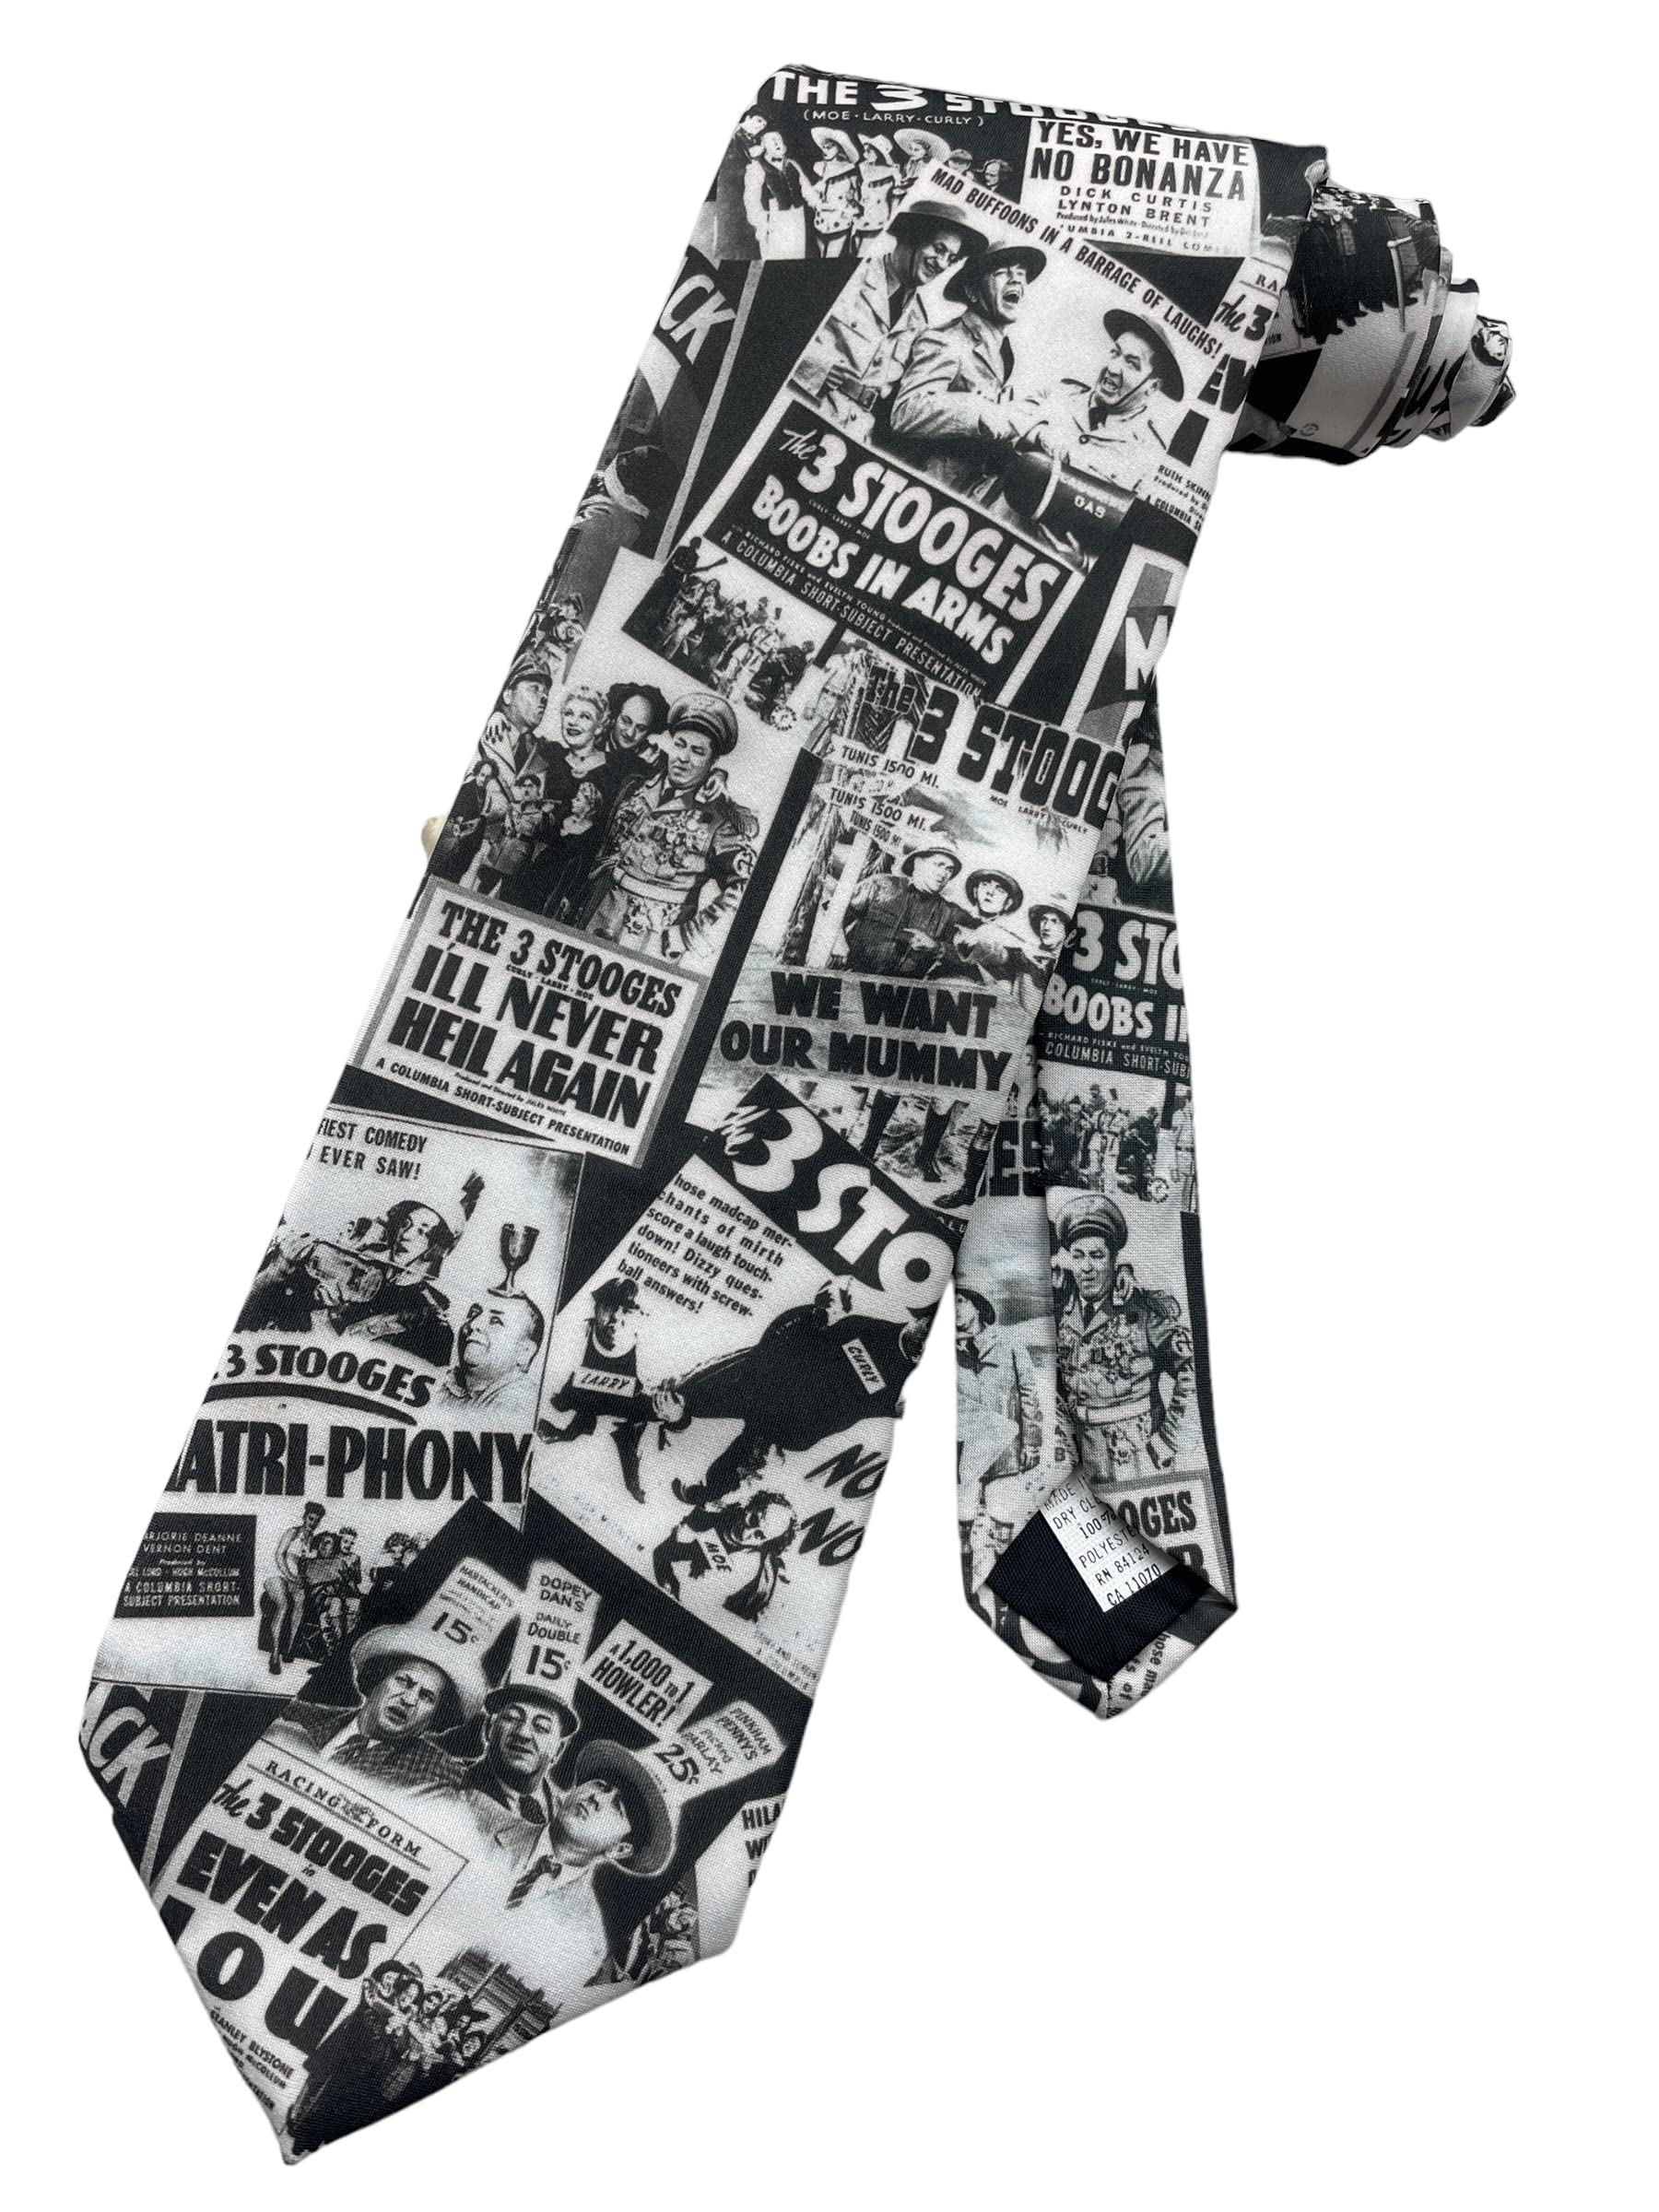 Three Stooges tie, featuring movie posters from several of their shorts